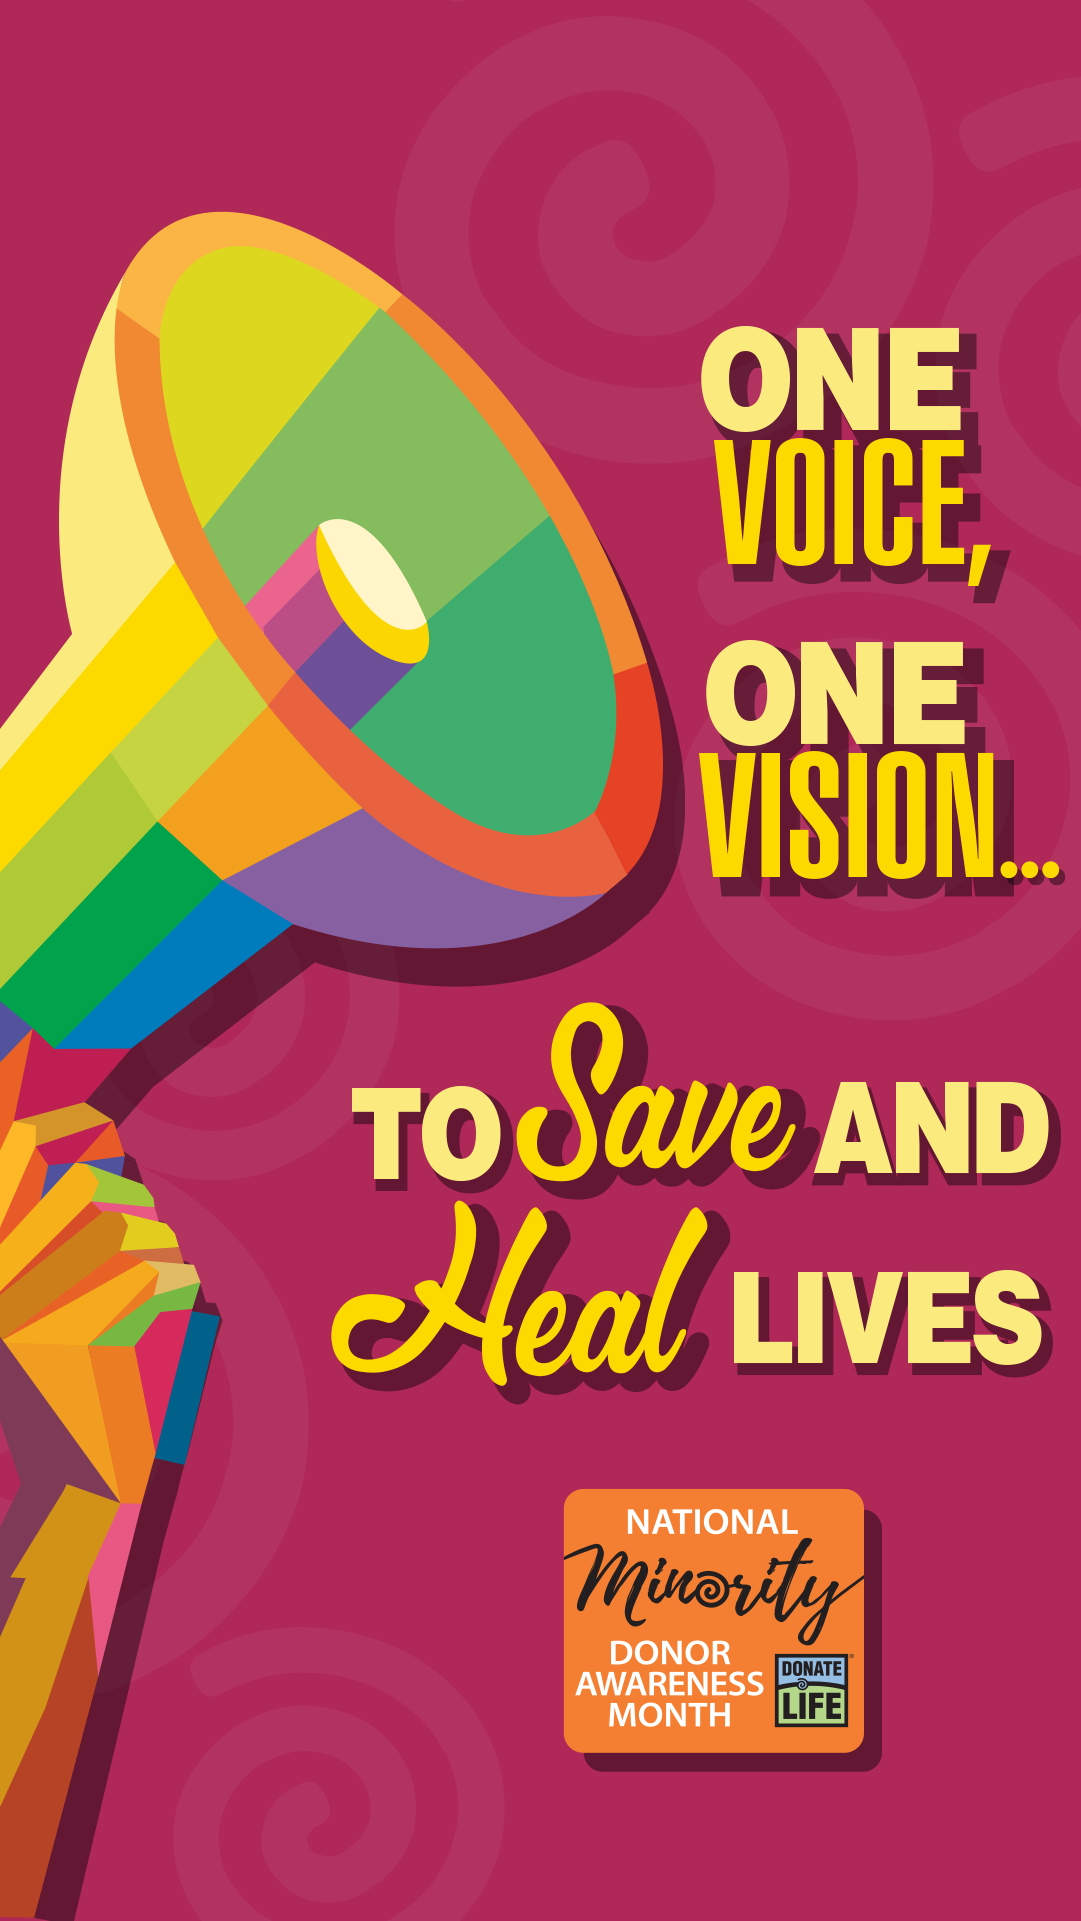 One voice, one vision... to save and heal lives